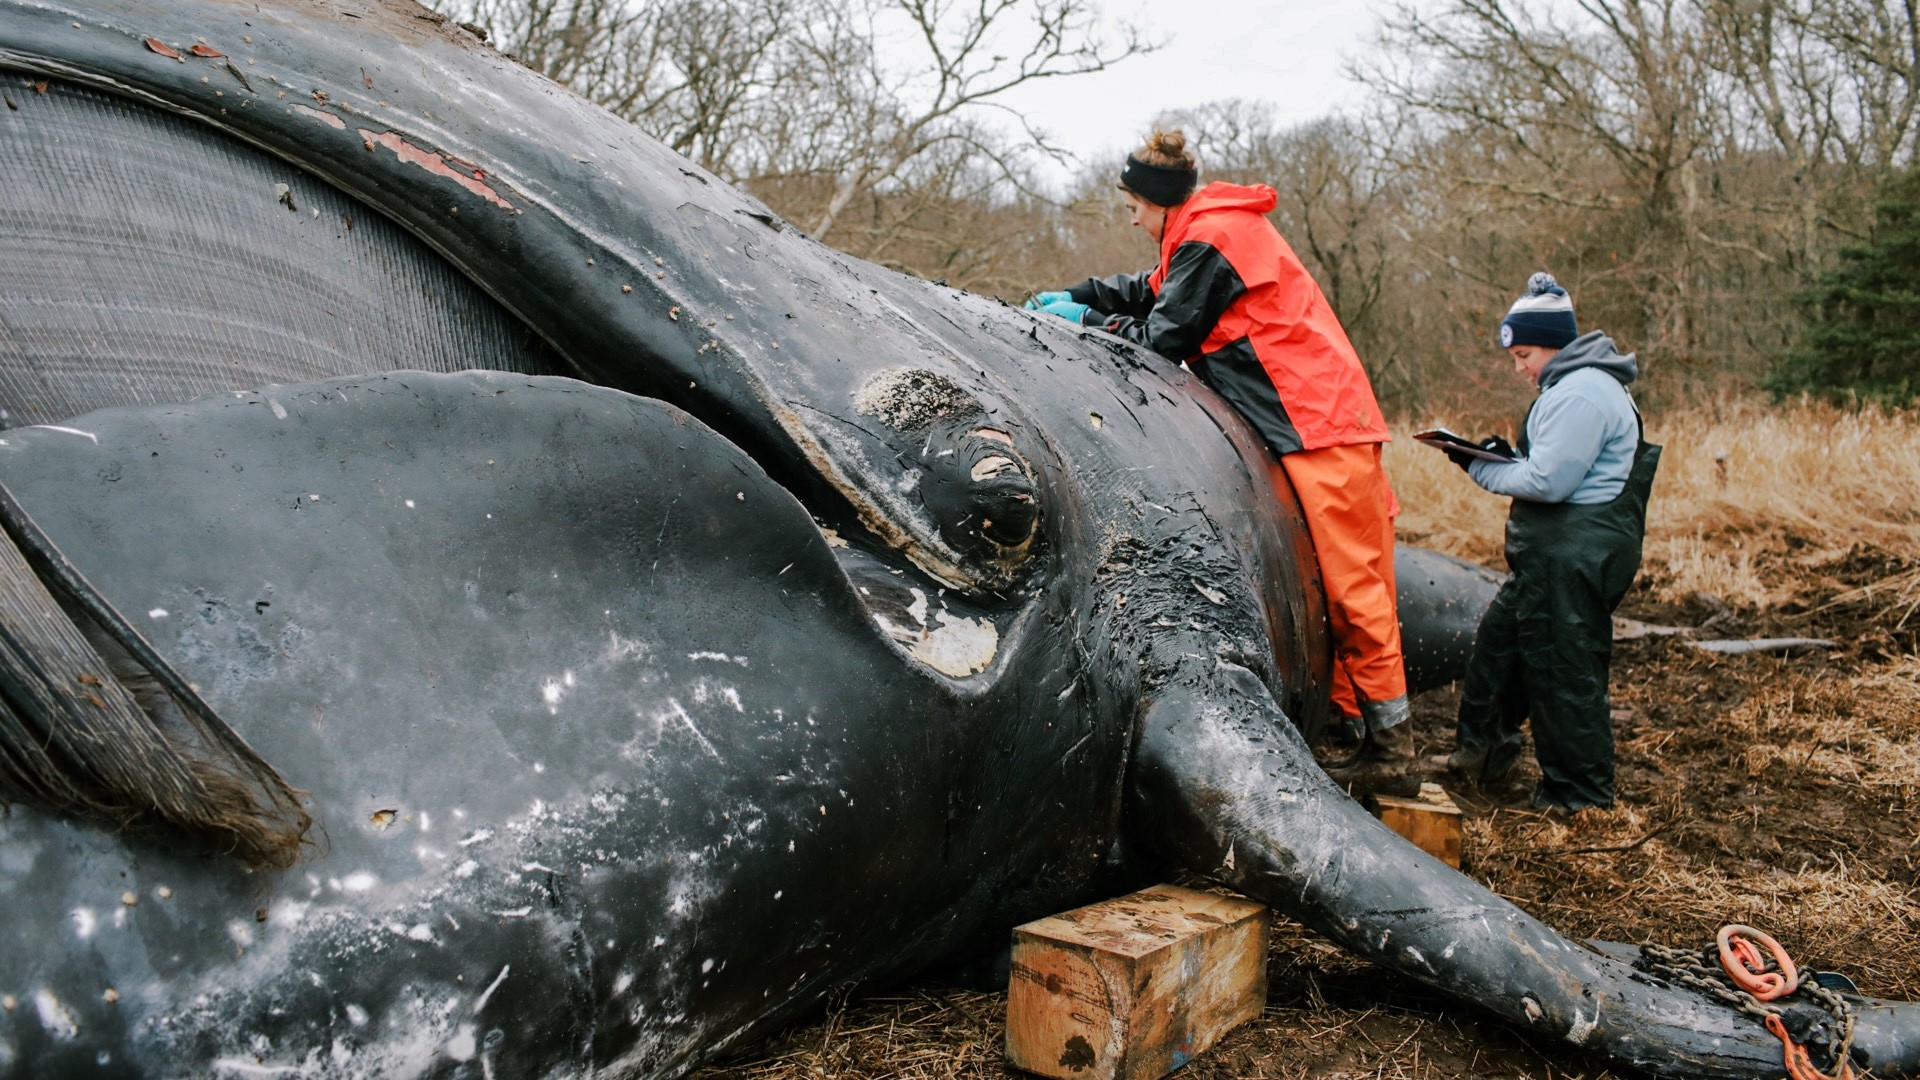 The whale, found on Martha's Vineyard in January, may have died from Maine lobster fishing gear. The industry has long debated over its risk to the whale.